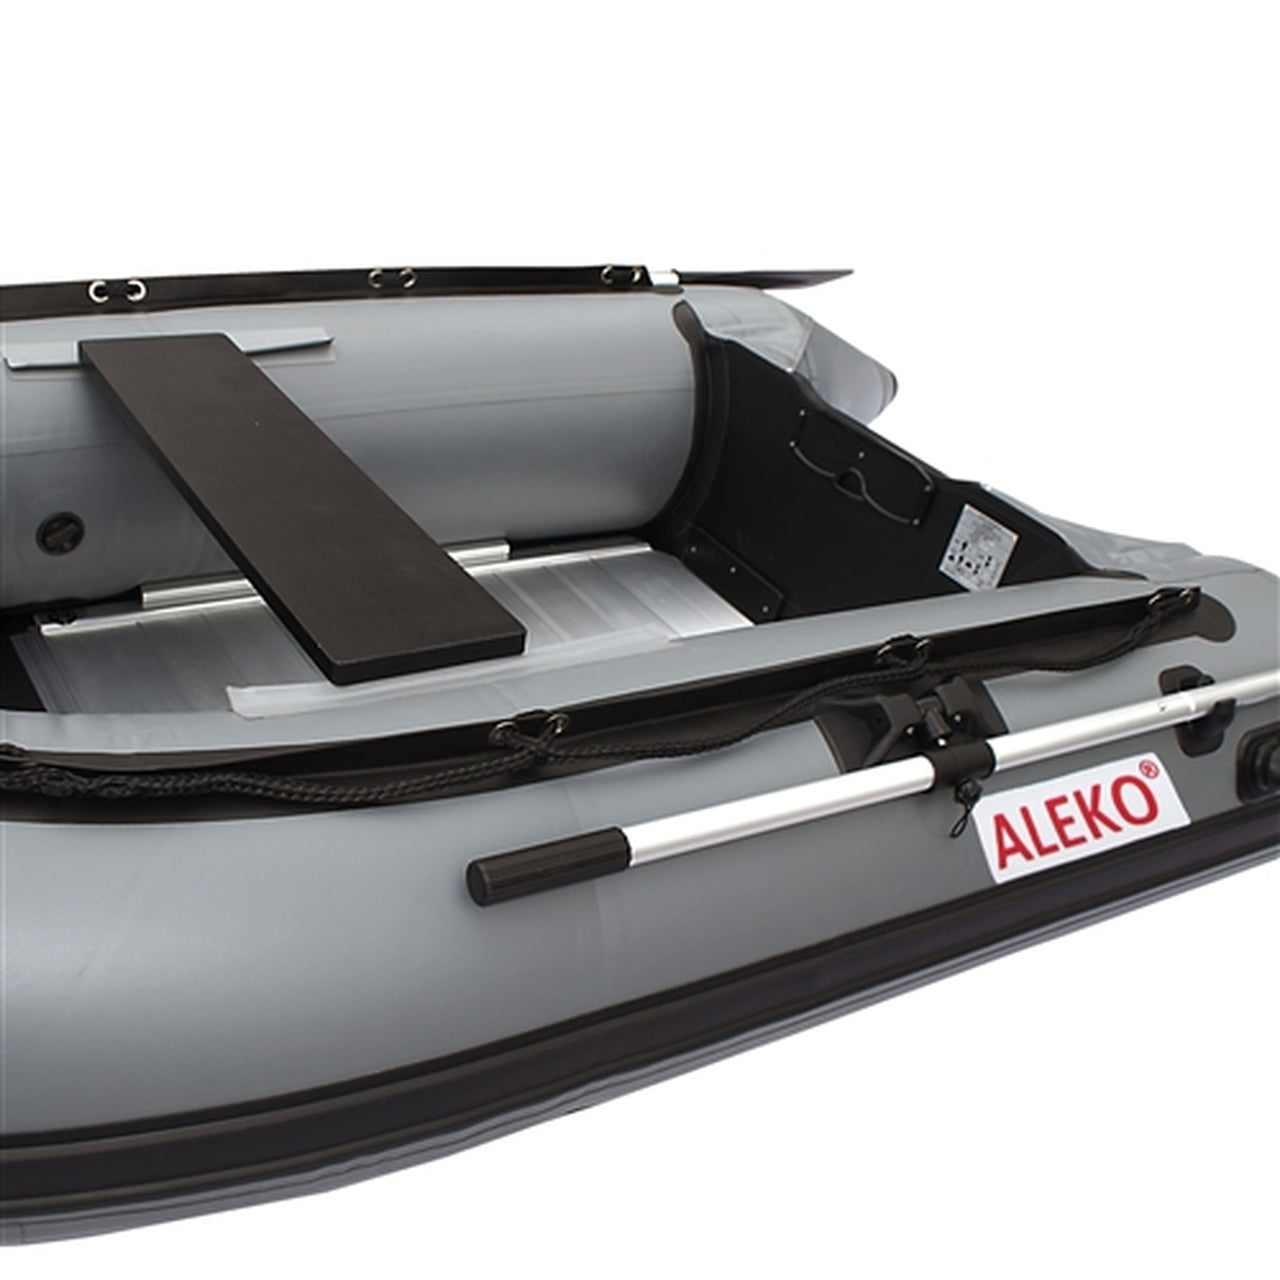 Aleko Boats Inflatable Boat with Aluminum Floor - 8.4 ft -